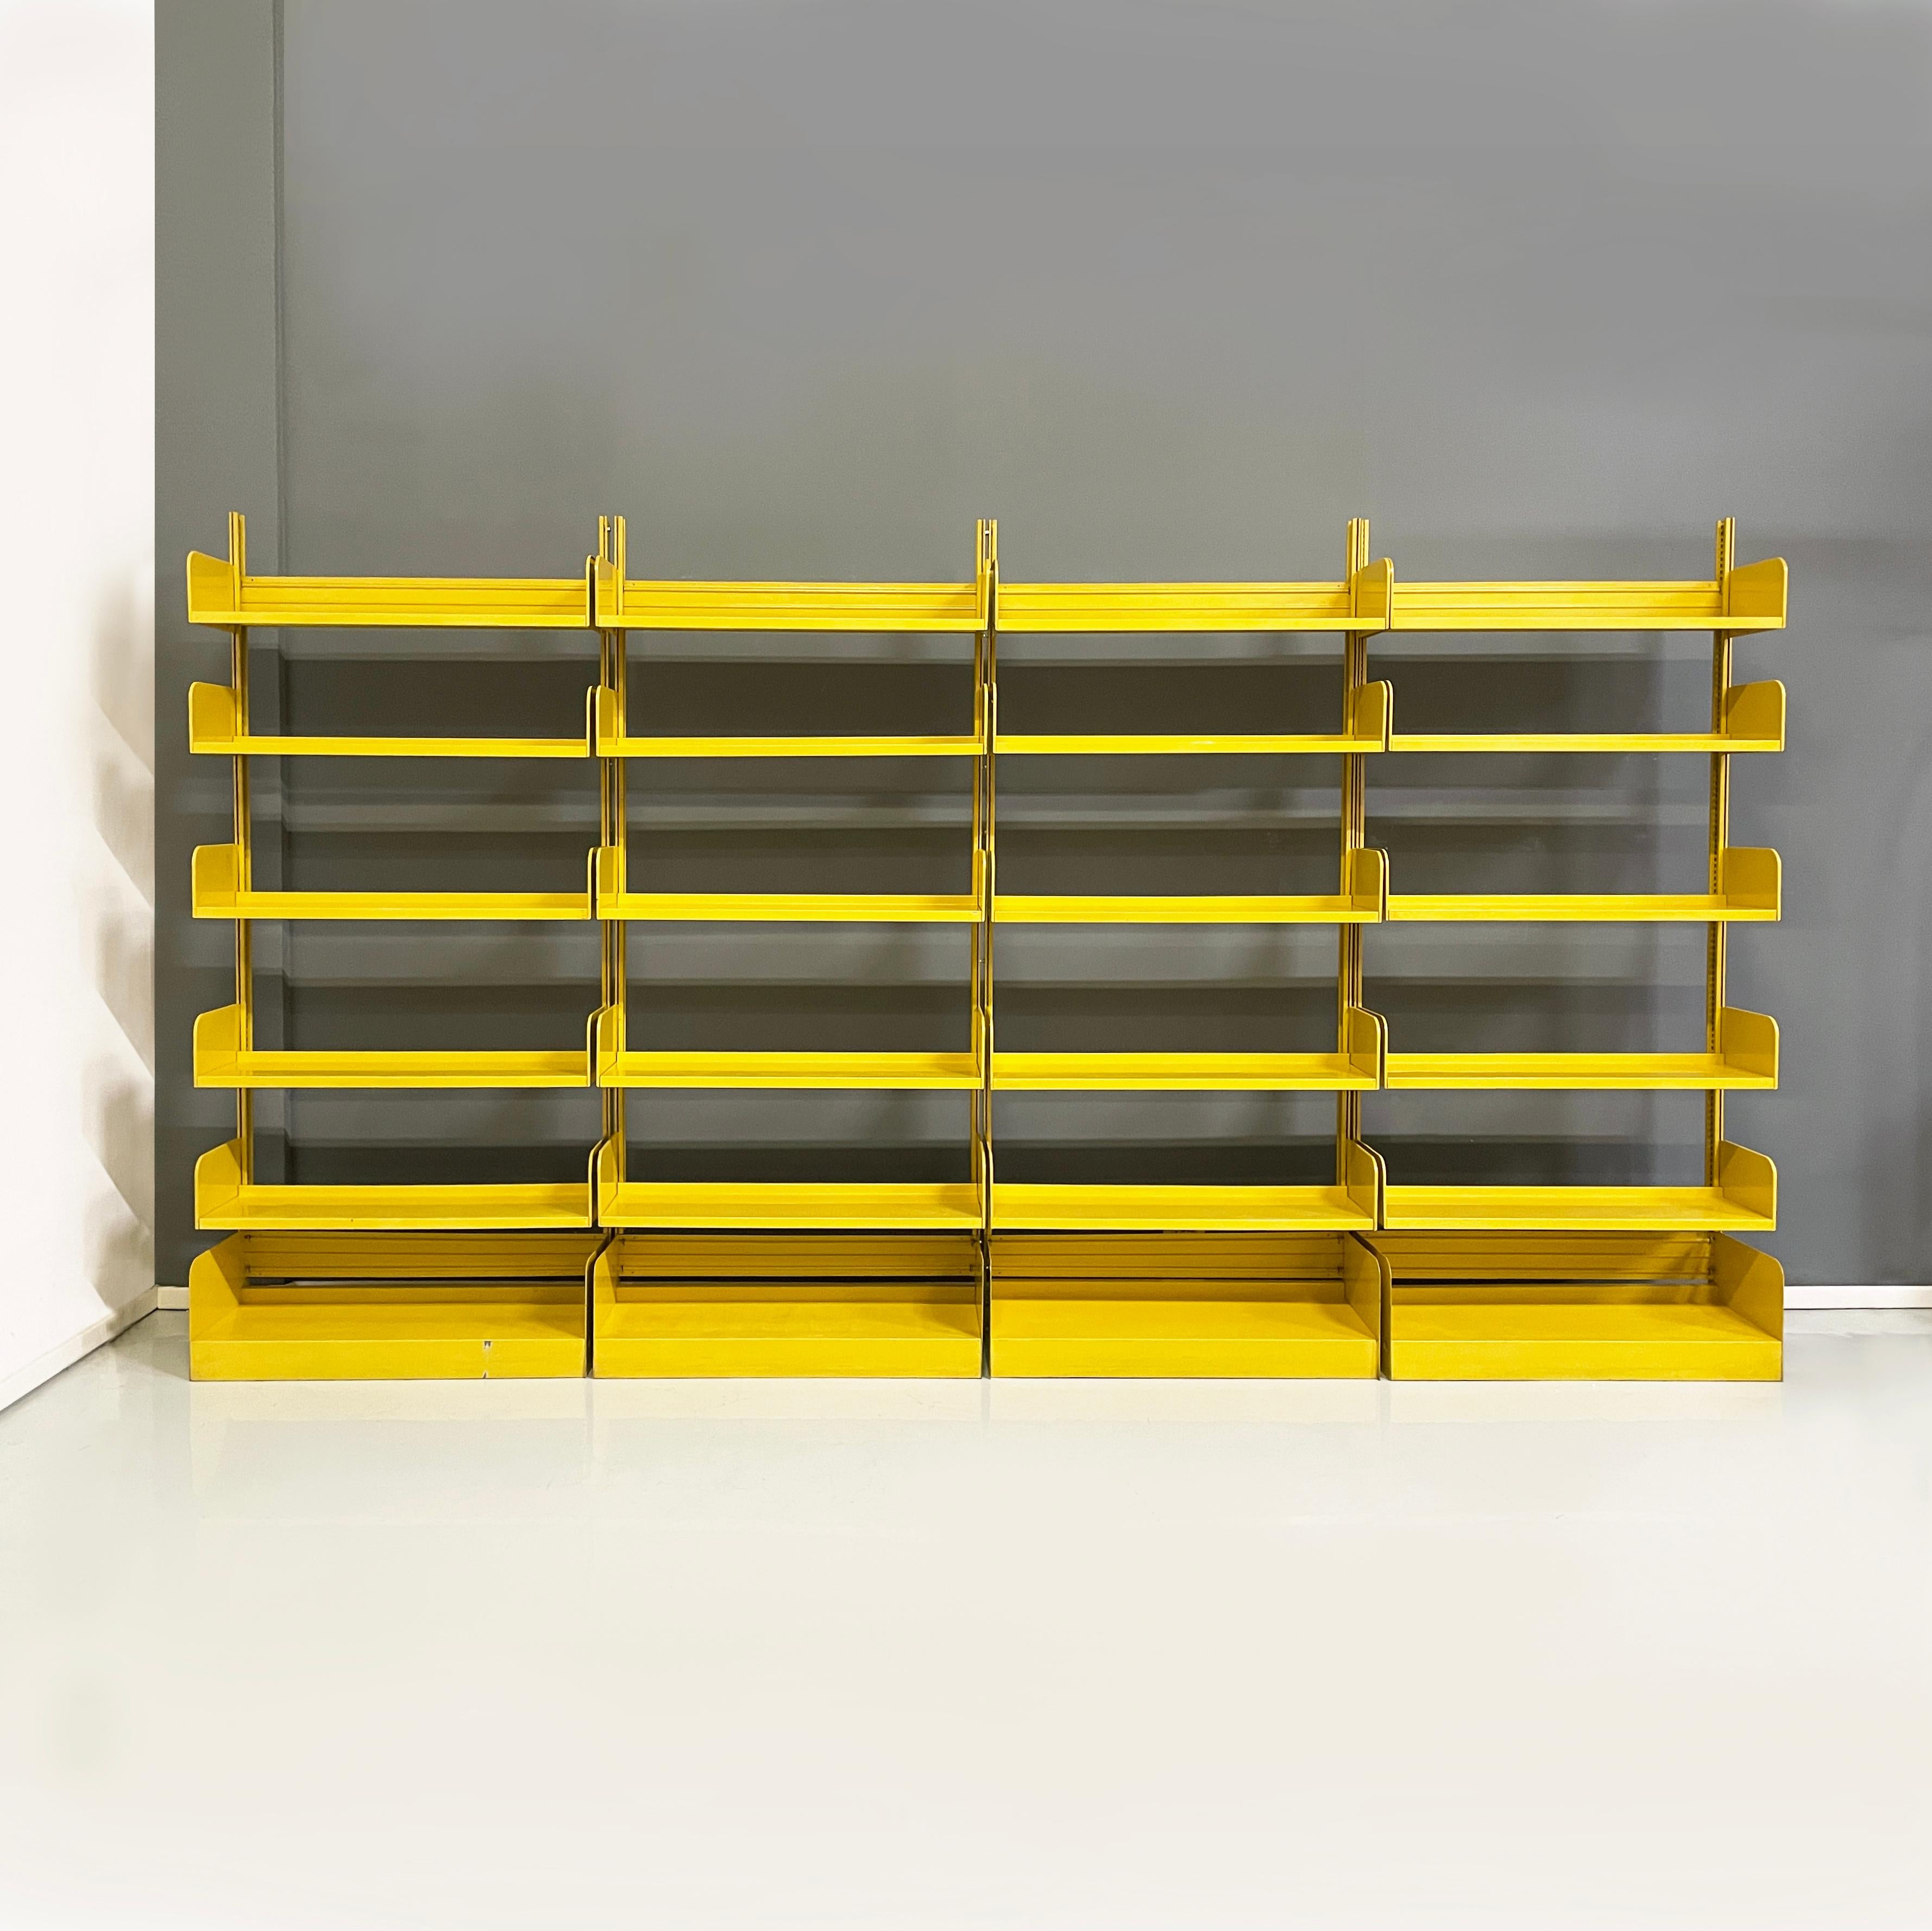 Italian mid-century modern Yellow metal modular bookcase Congresso by Lips Vago, 1960s
Modular self-supporting  bookcase mod. Congresso with structure entirely in bright yellow metal. The structure is made up of 4 modules, which can be used together